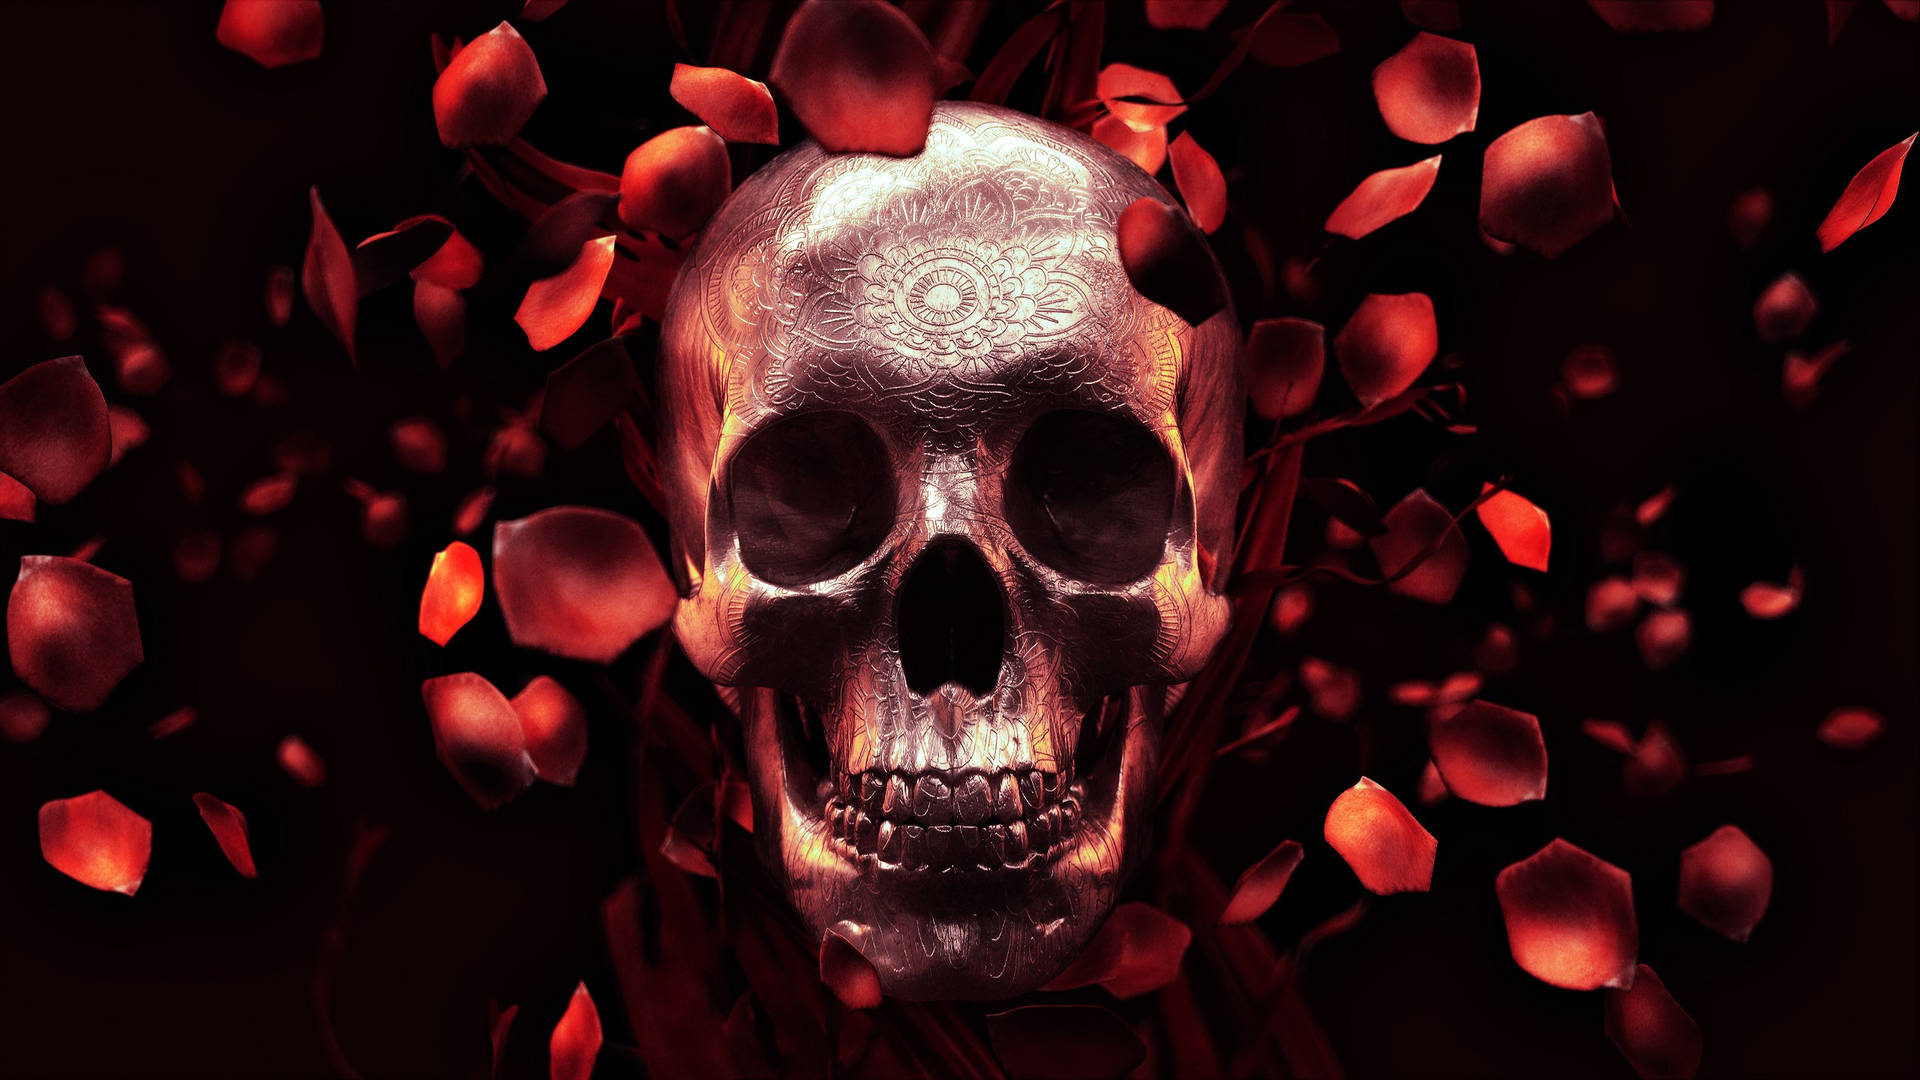 Hd Skull With Red Petals Background